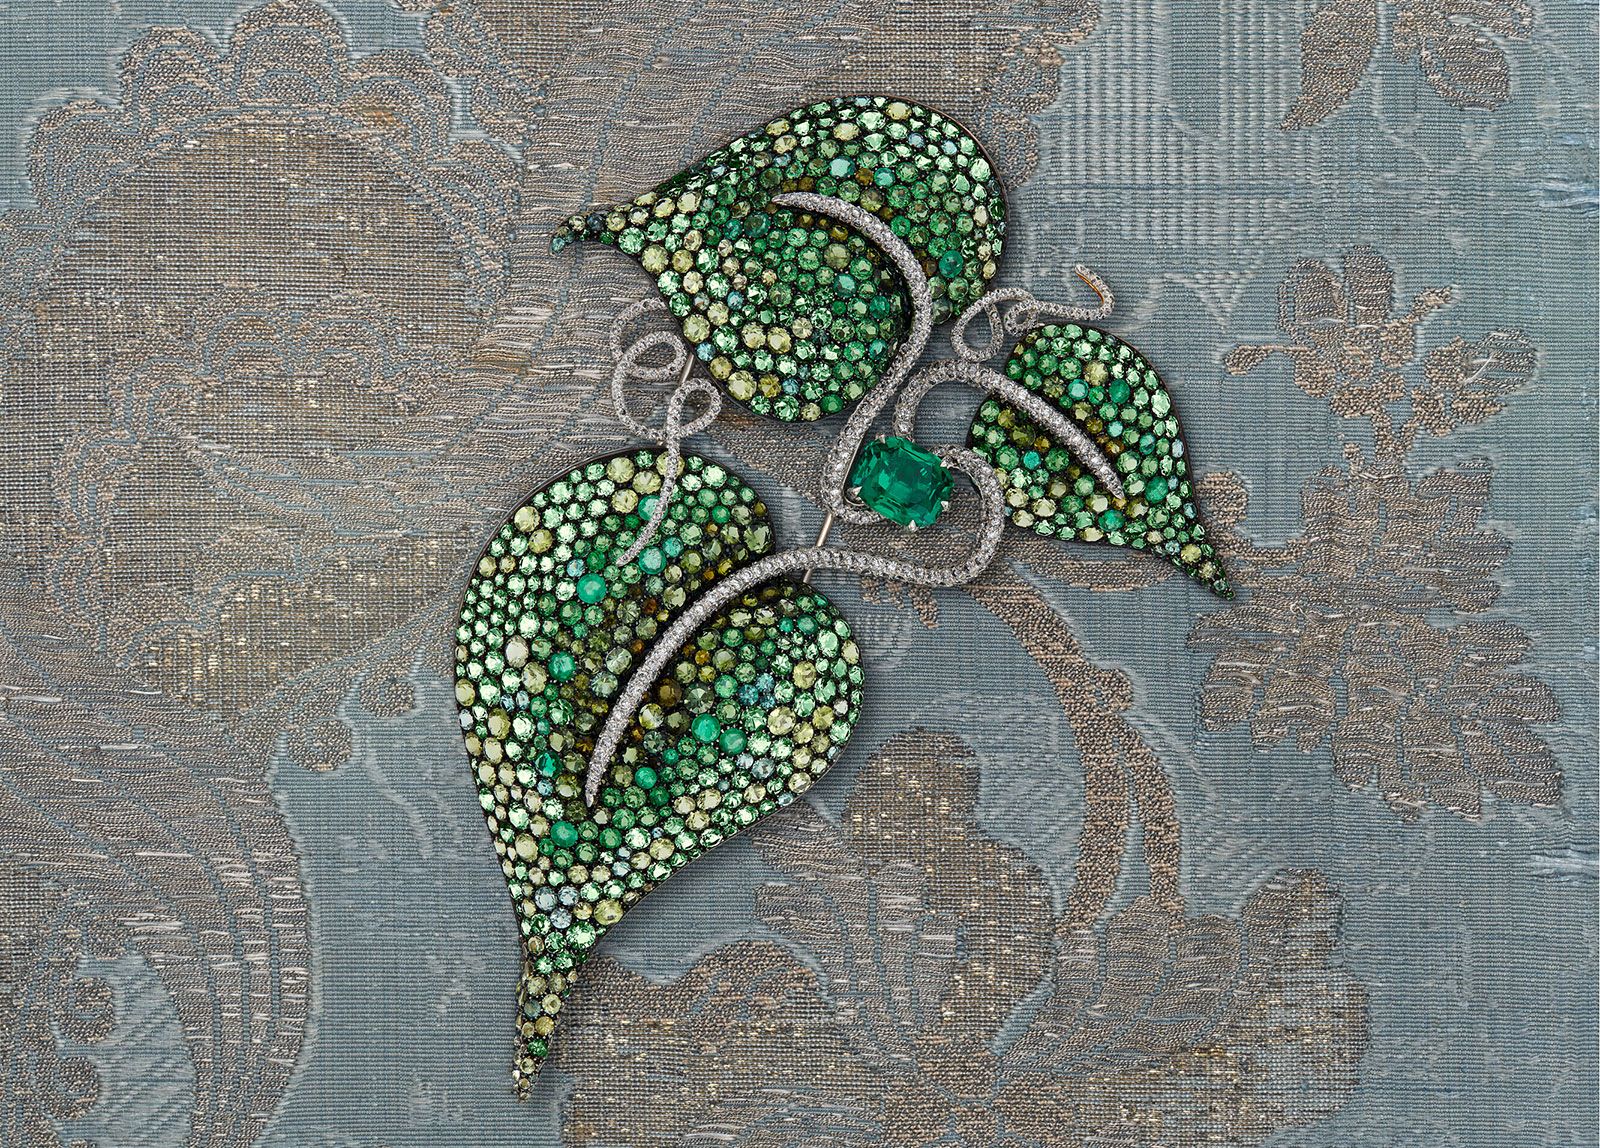 JAR multi-gemstone and diamond Leaf brooch with a cushion-cut emerald of 11.96 carats, further emeralds, beryls, peridots, garnets, green tourmalines and diamonds in 14k and 18k yellow gold, platinum and silver (1989)